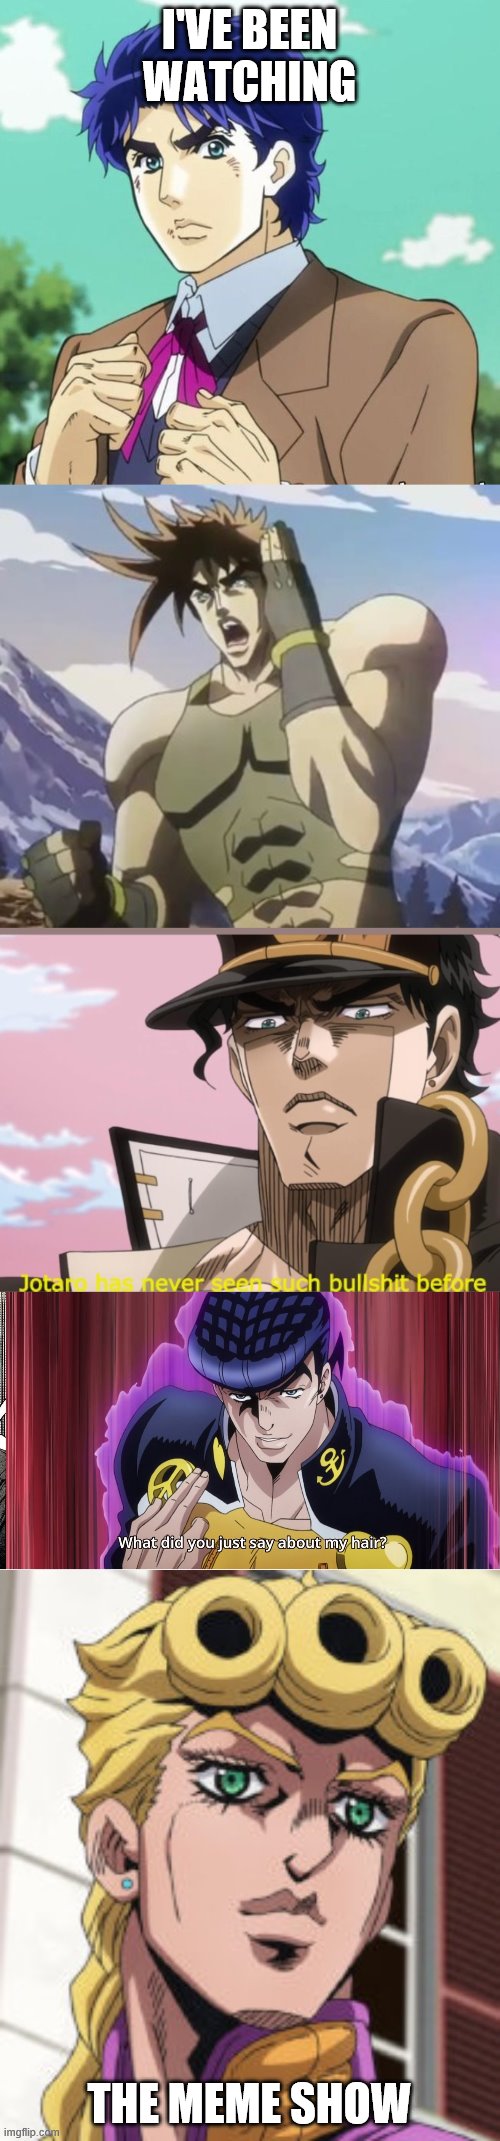 JoJo+ Meme gold mine | I'VE BEEN WATCHING; THE MEME SHOW | image tagged in nigerundayo,giorno giovanna porcoddio,jonathan joestar,jotaro has never seen such bullshit before,what did you just say about my | made w/ Imgflip meme maker